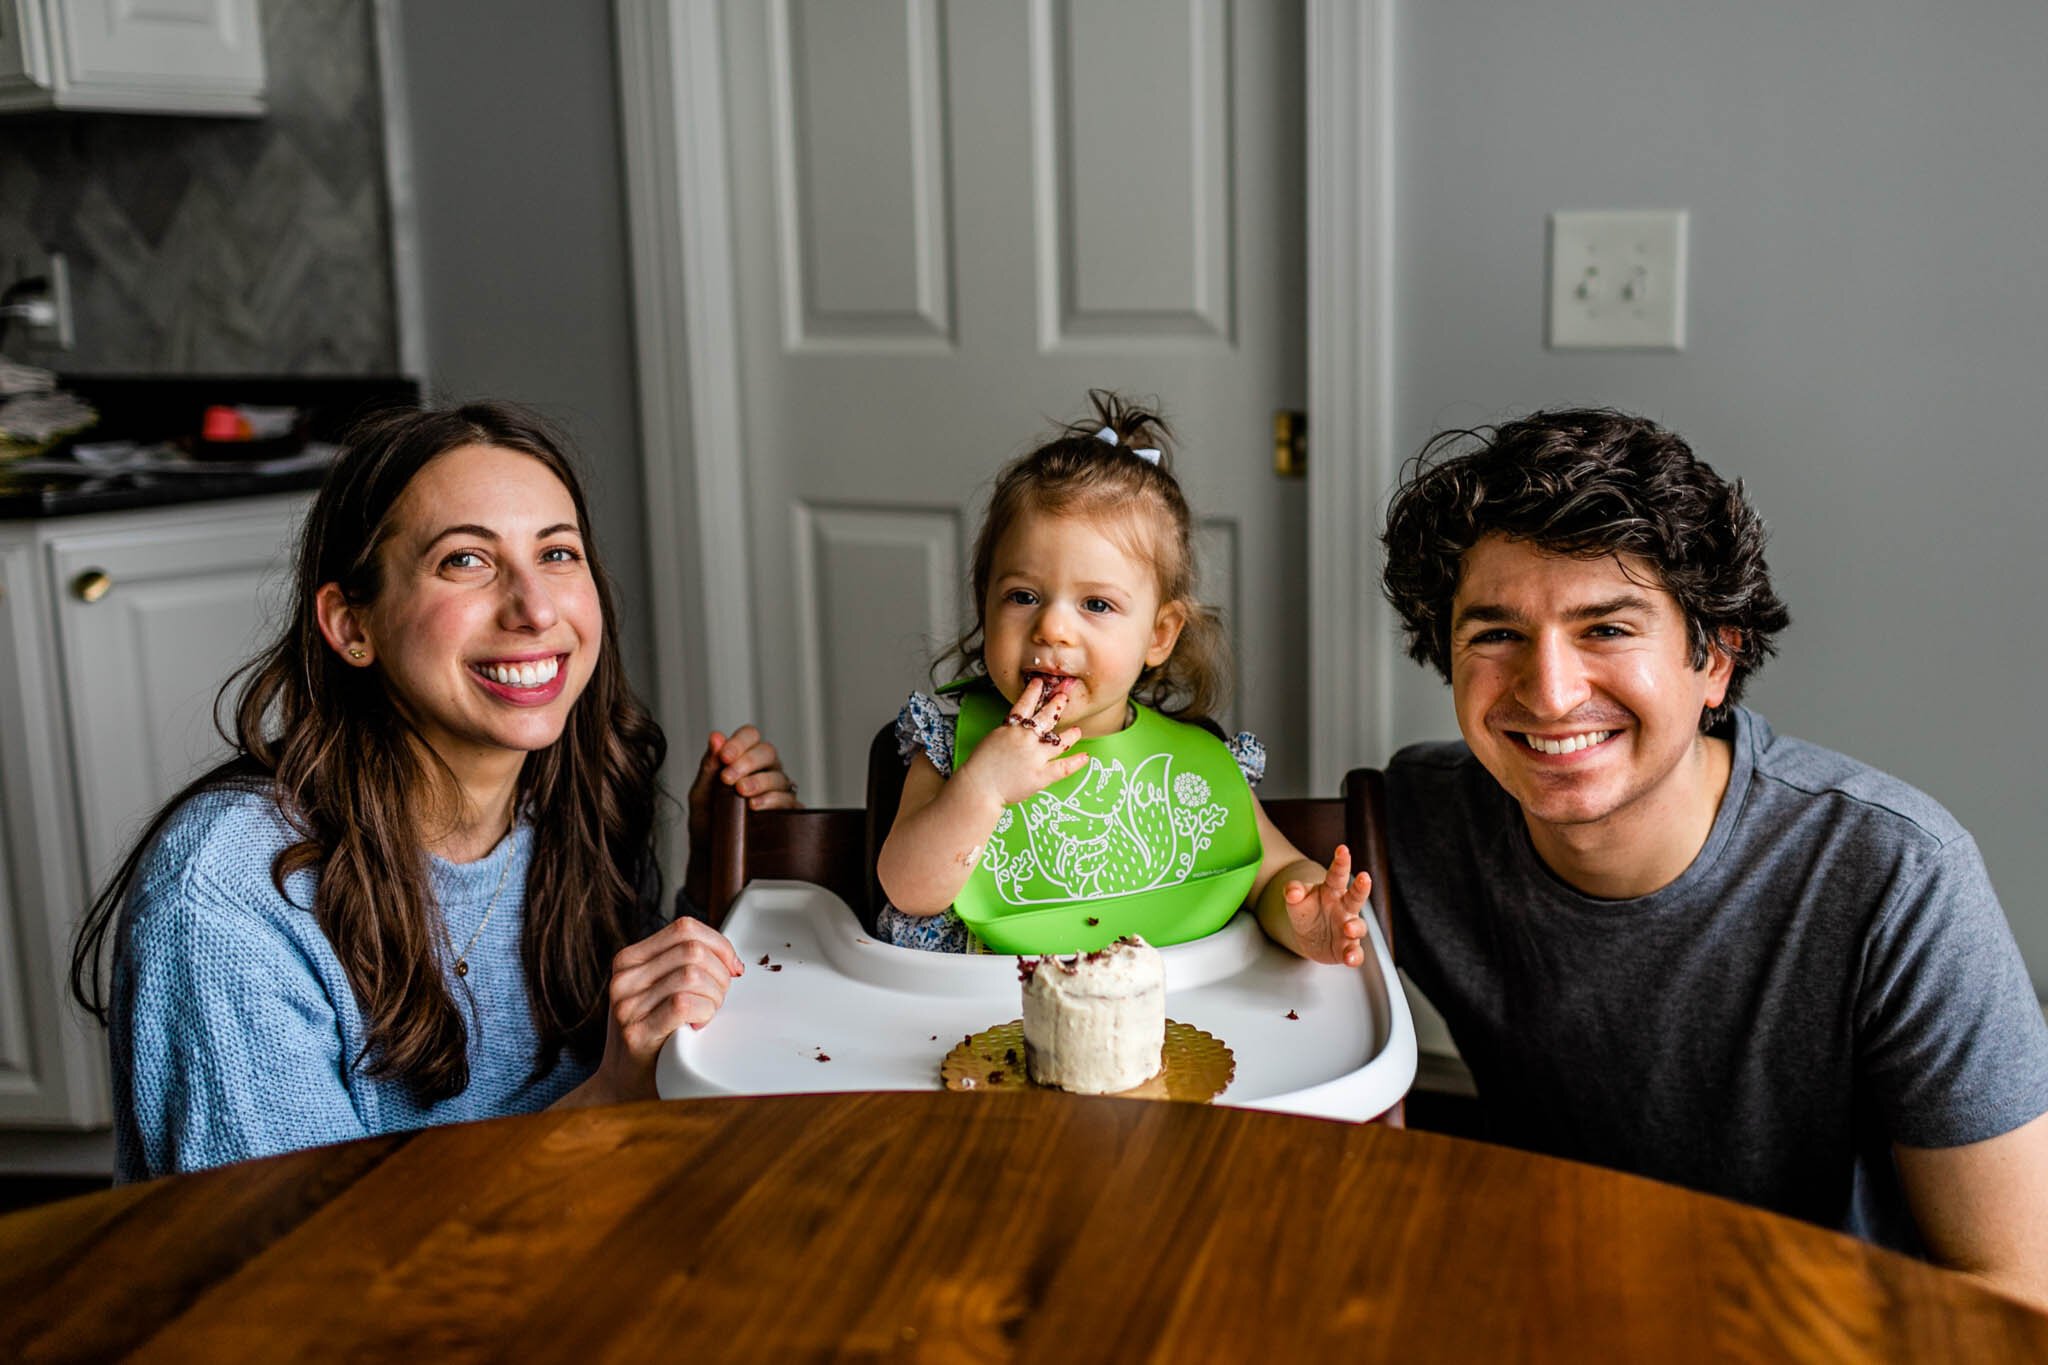 Durham Family Photographer | By G. Lin Photography | Cake smash for first birthday photo